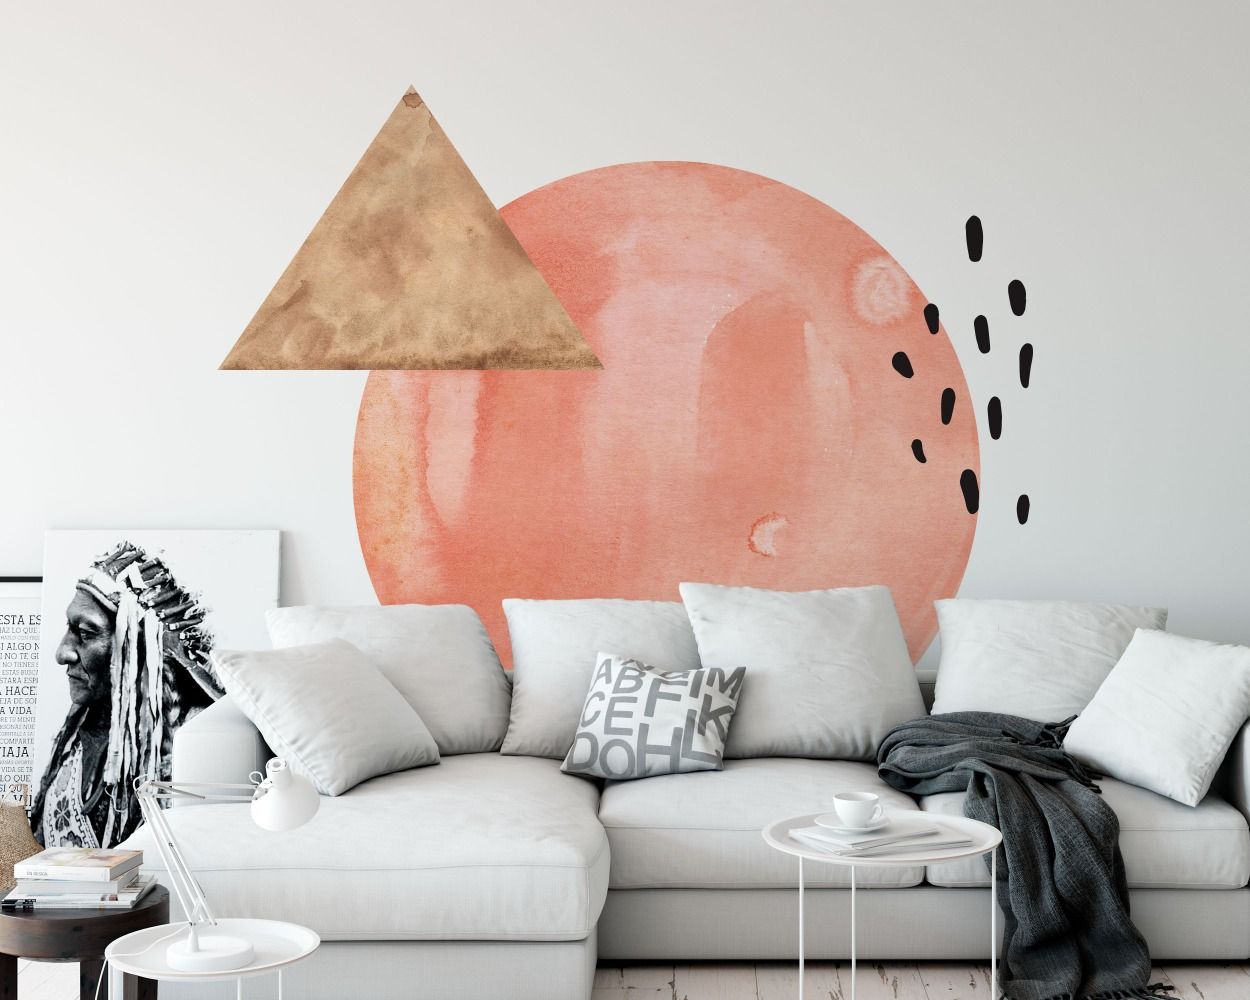 Cute and best style triangle, Circle Shapes Watercolor Bohemian vinyl Wall decals for nursery wall decor